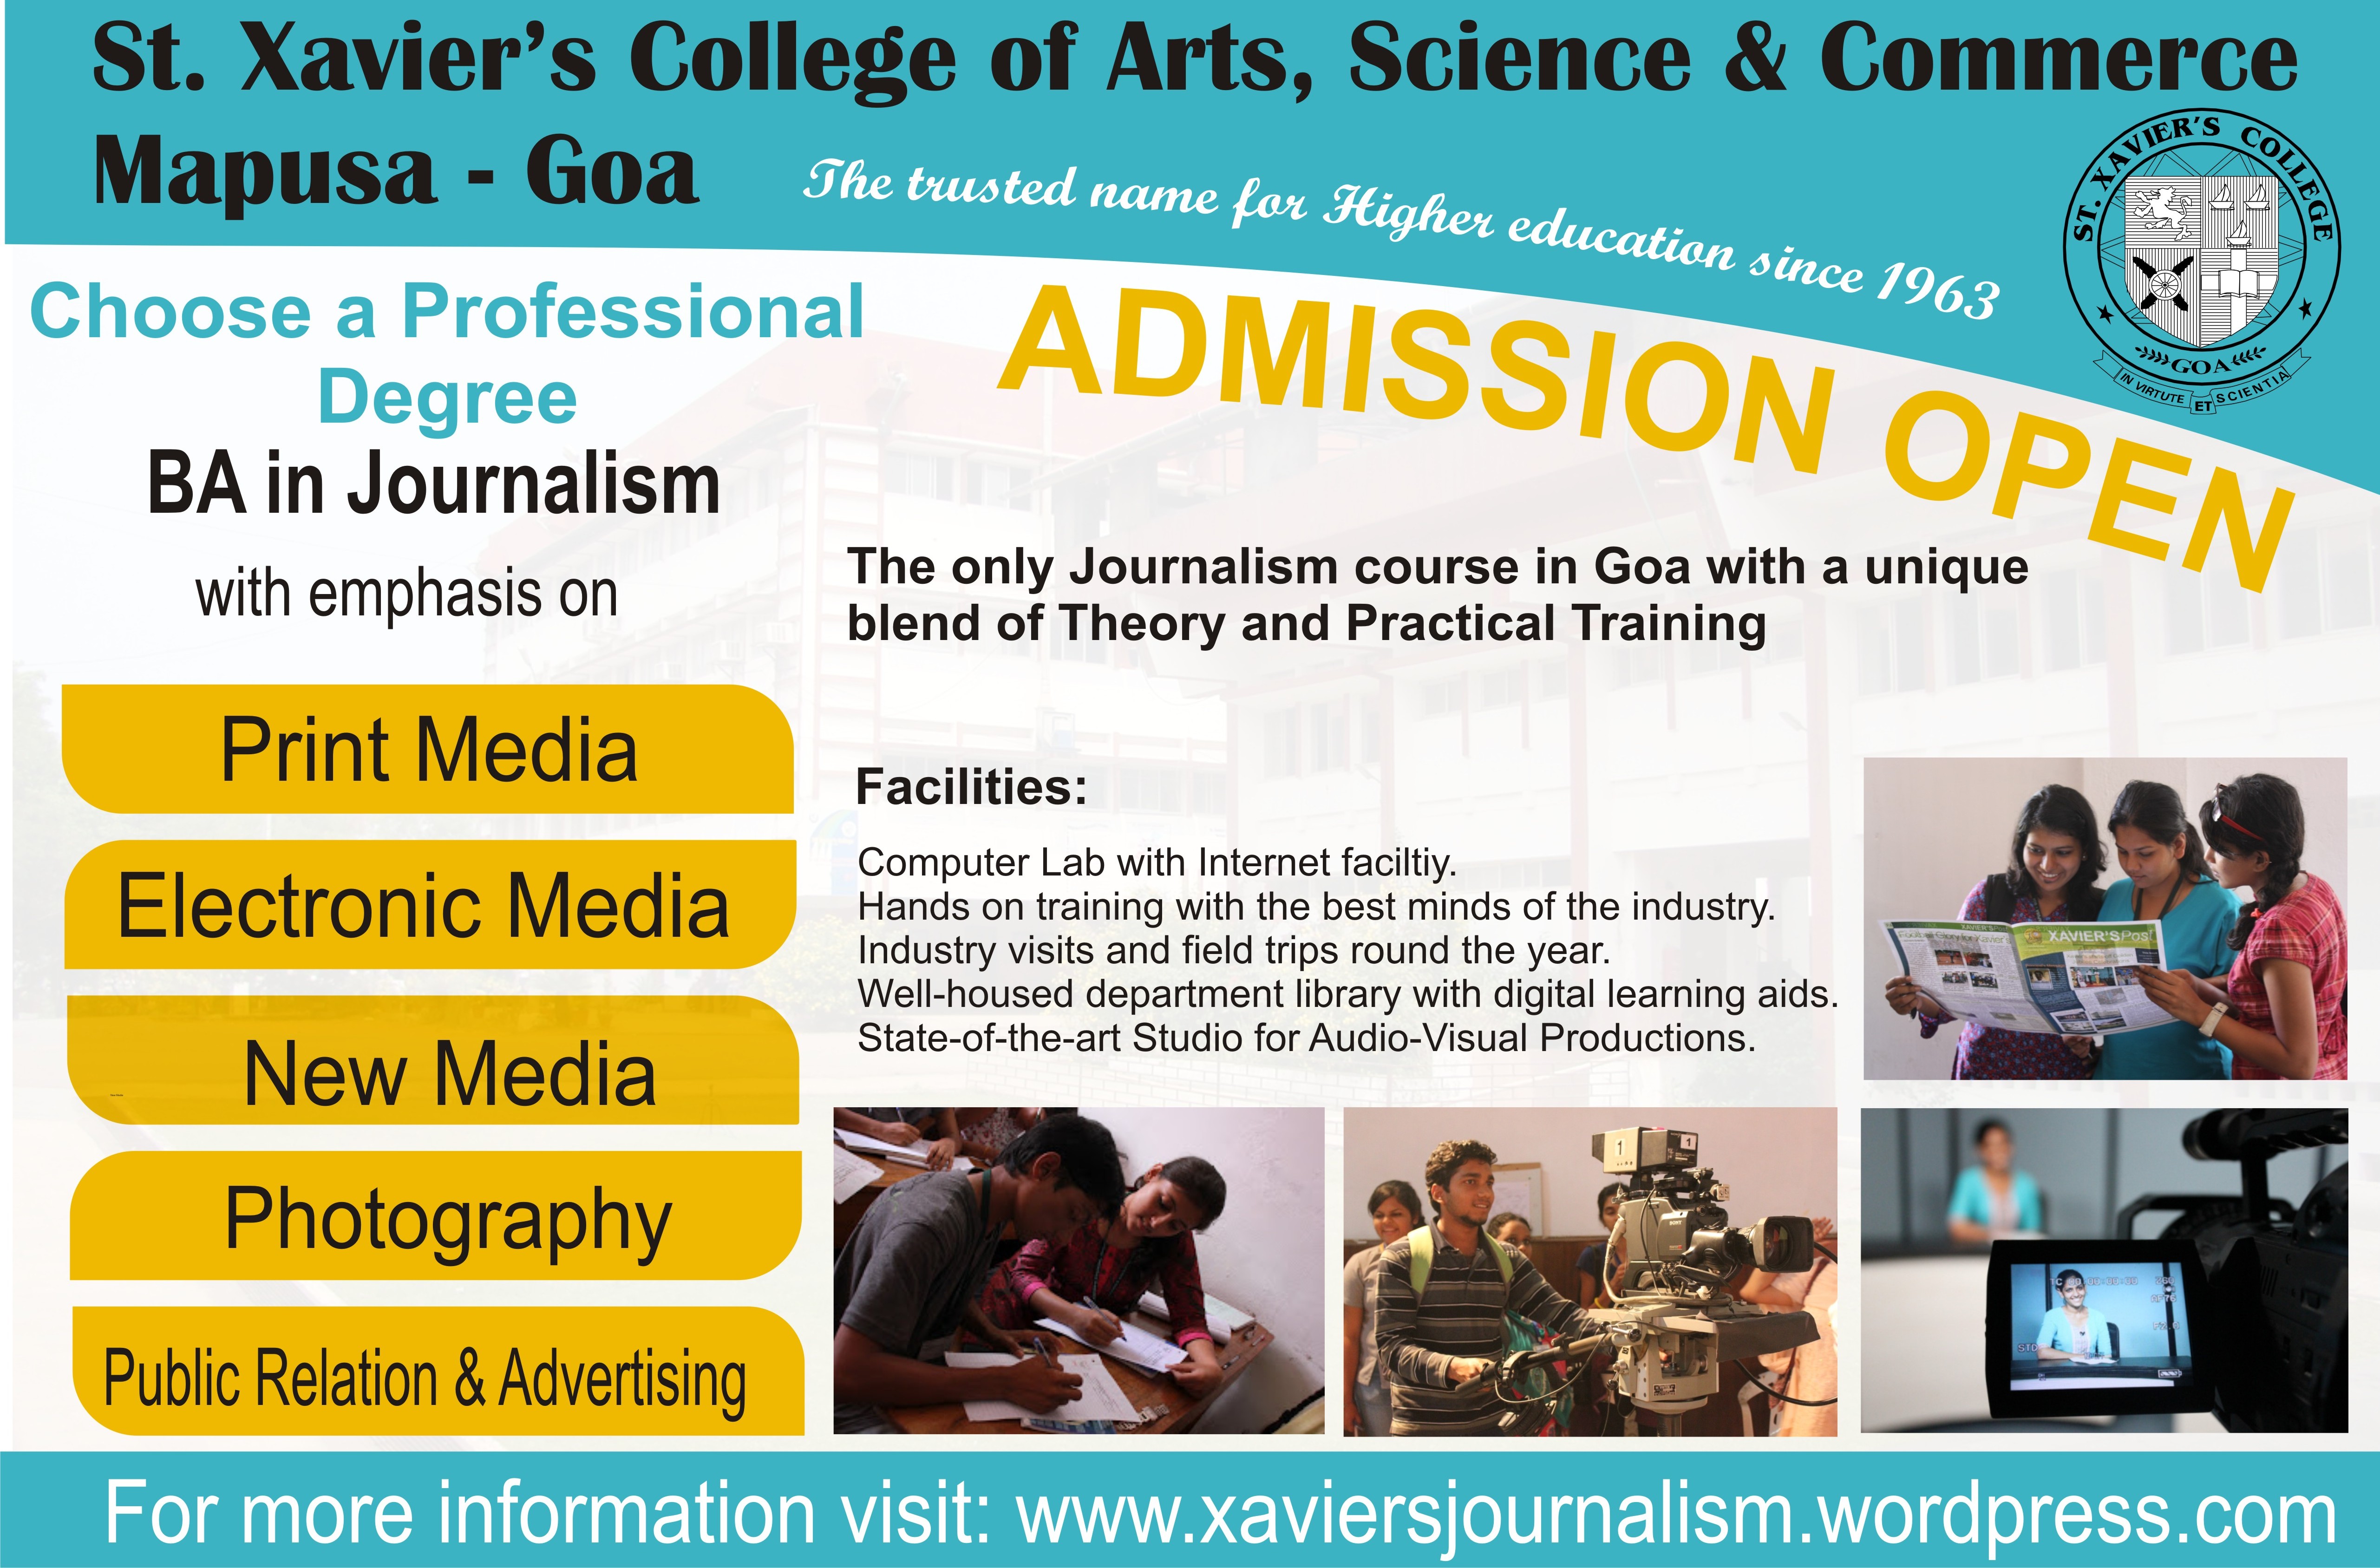 ADMISSION to B.A. in Journalism to open on 14th May 2014